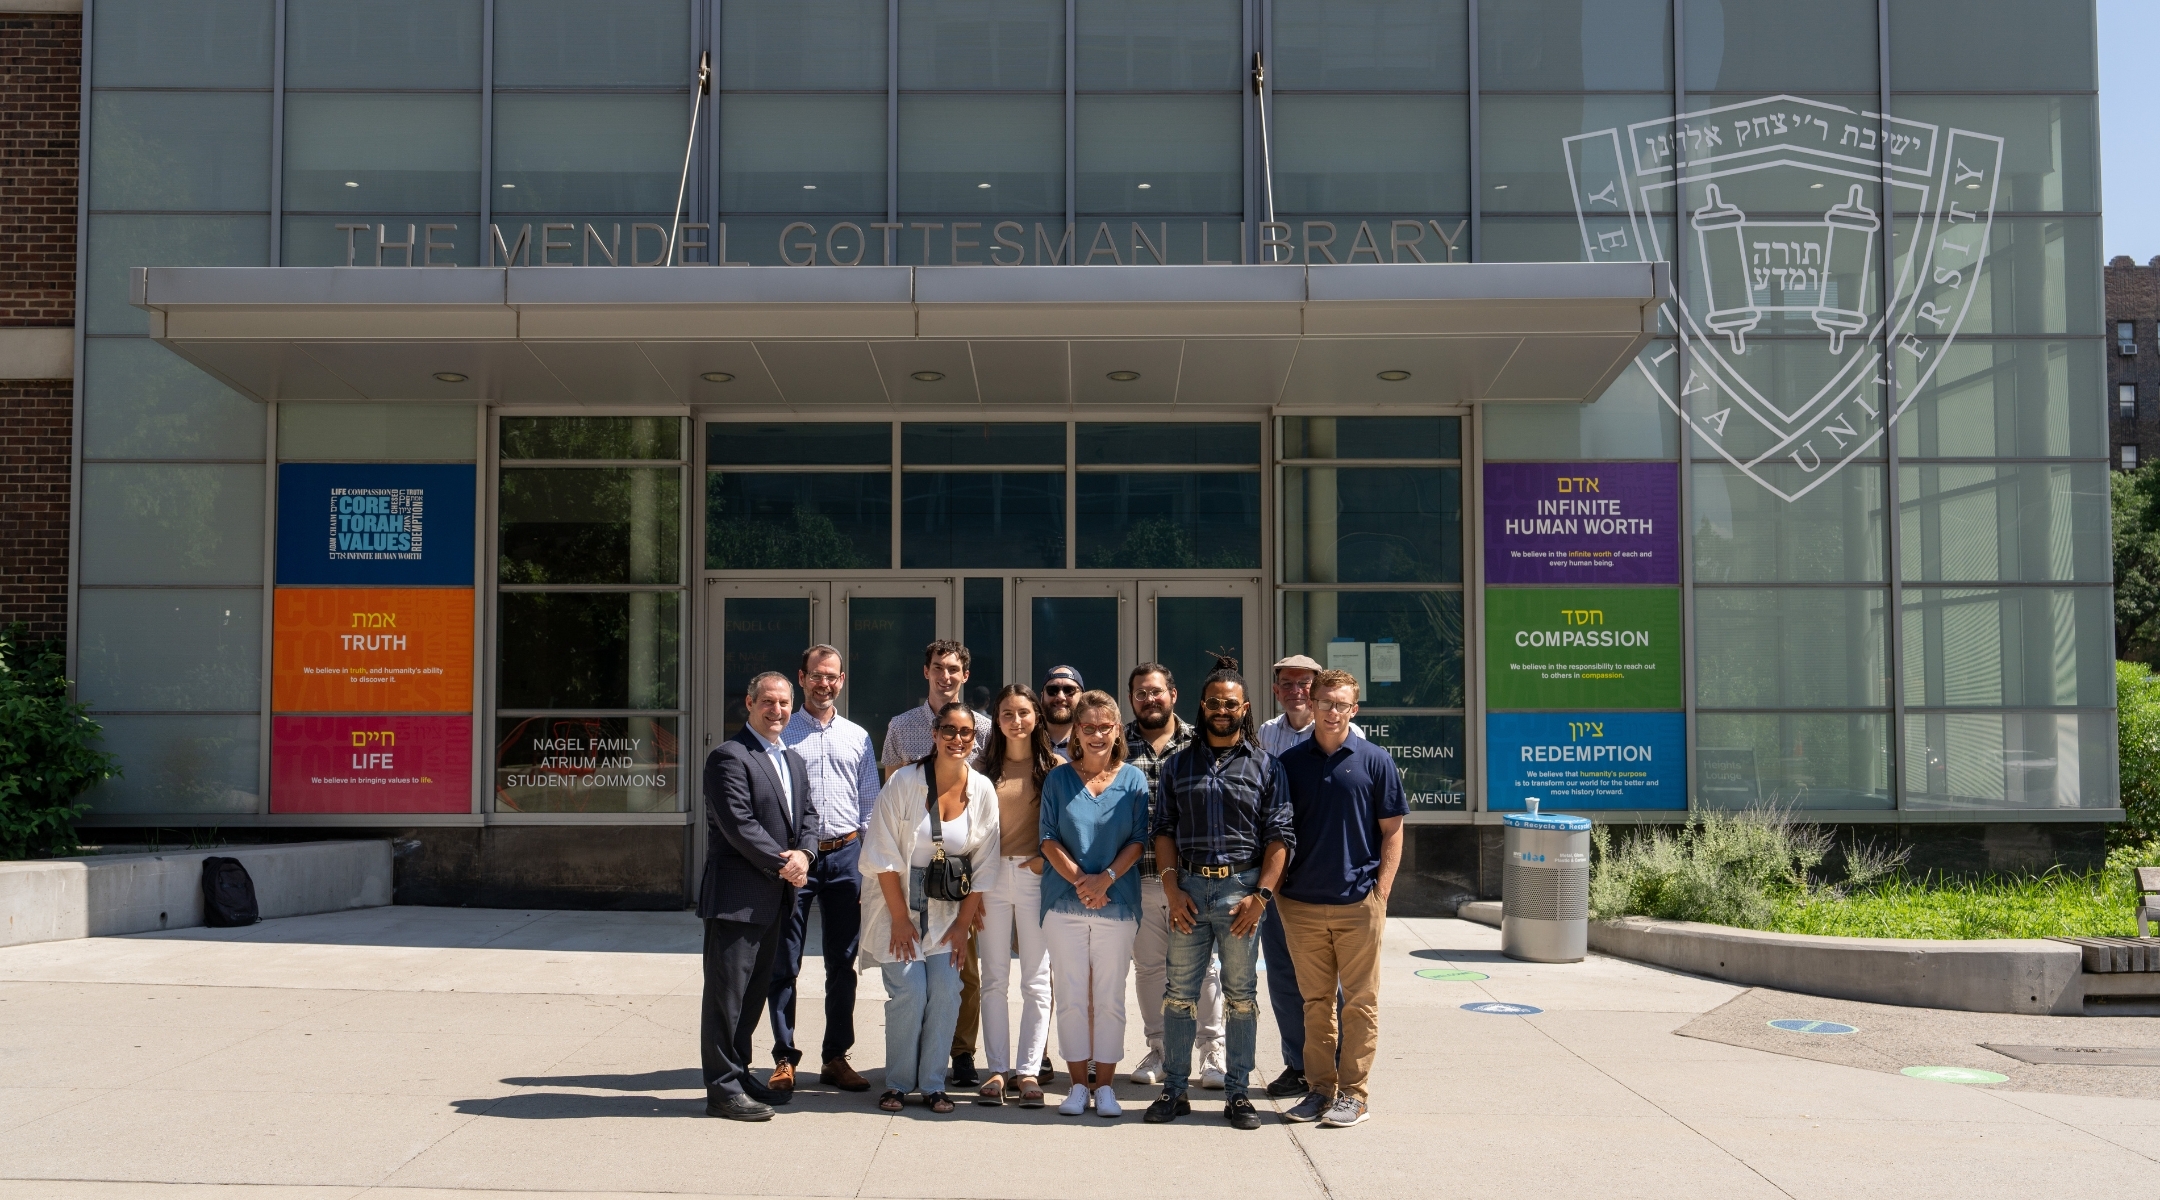 Christian students enrolled in the master’s program for Jewish studies at the Bernard Revel Graduate School of Jewish Studies at Yeshiva University, most of whom will study remotely, recently toured the New York campus. (Courtesy Yeshiva University)